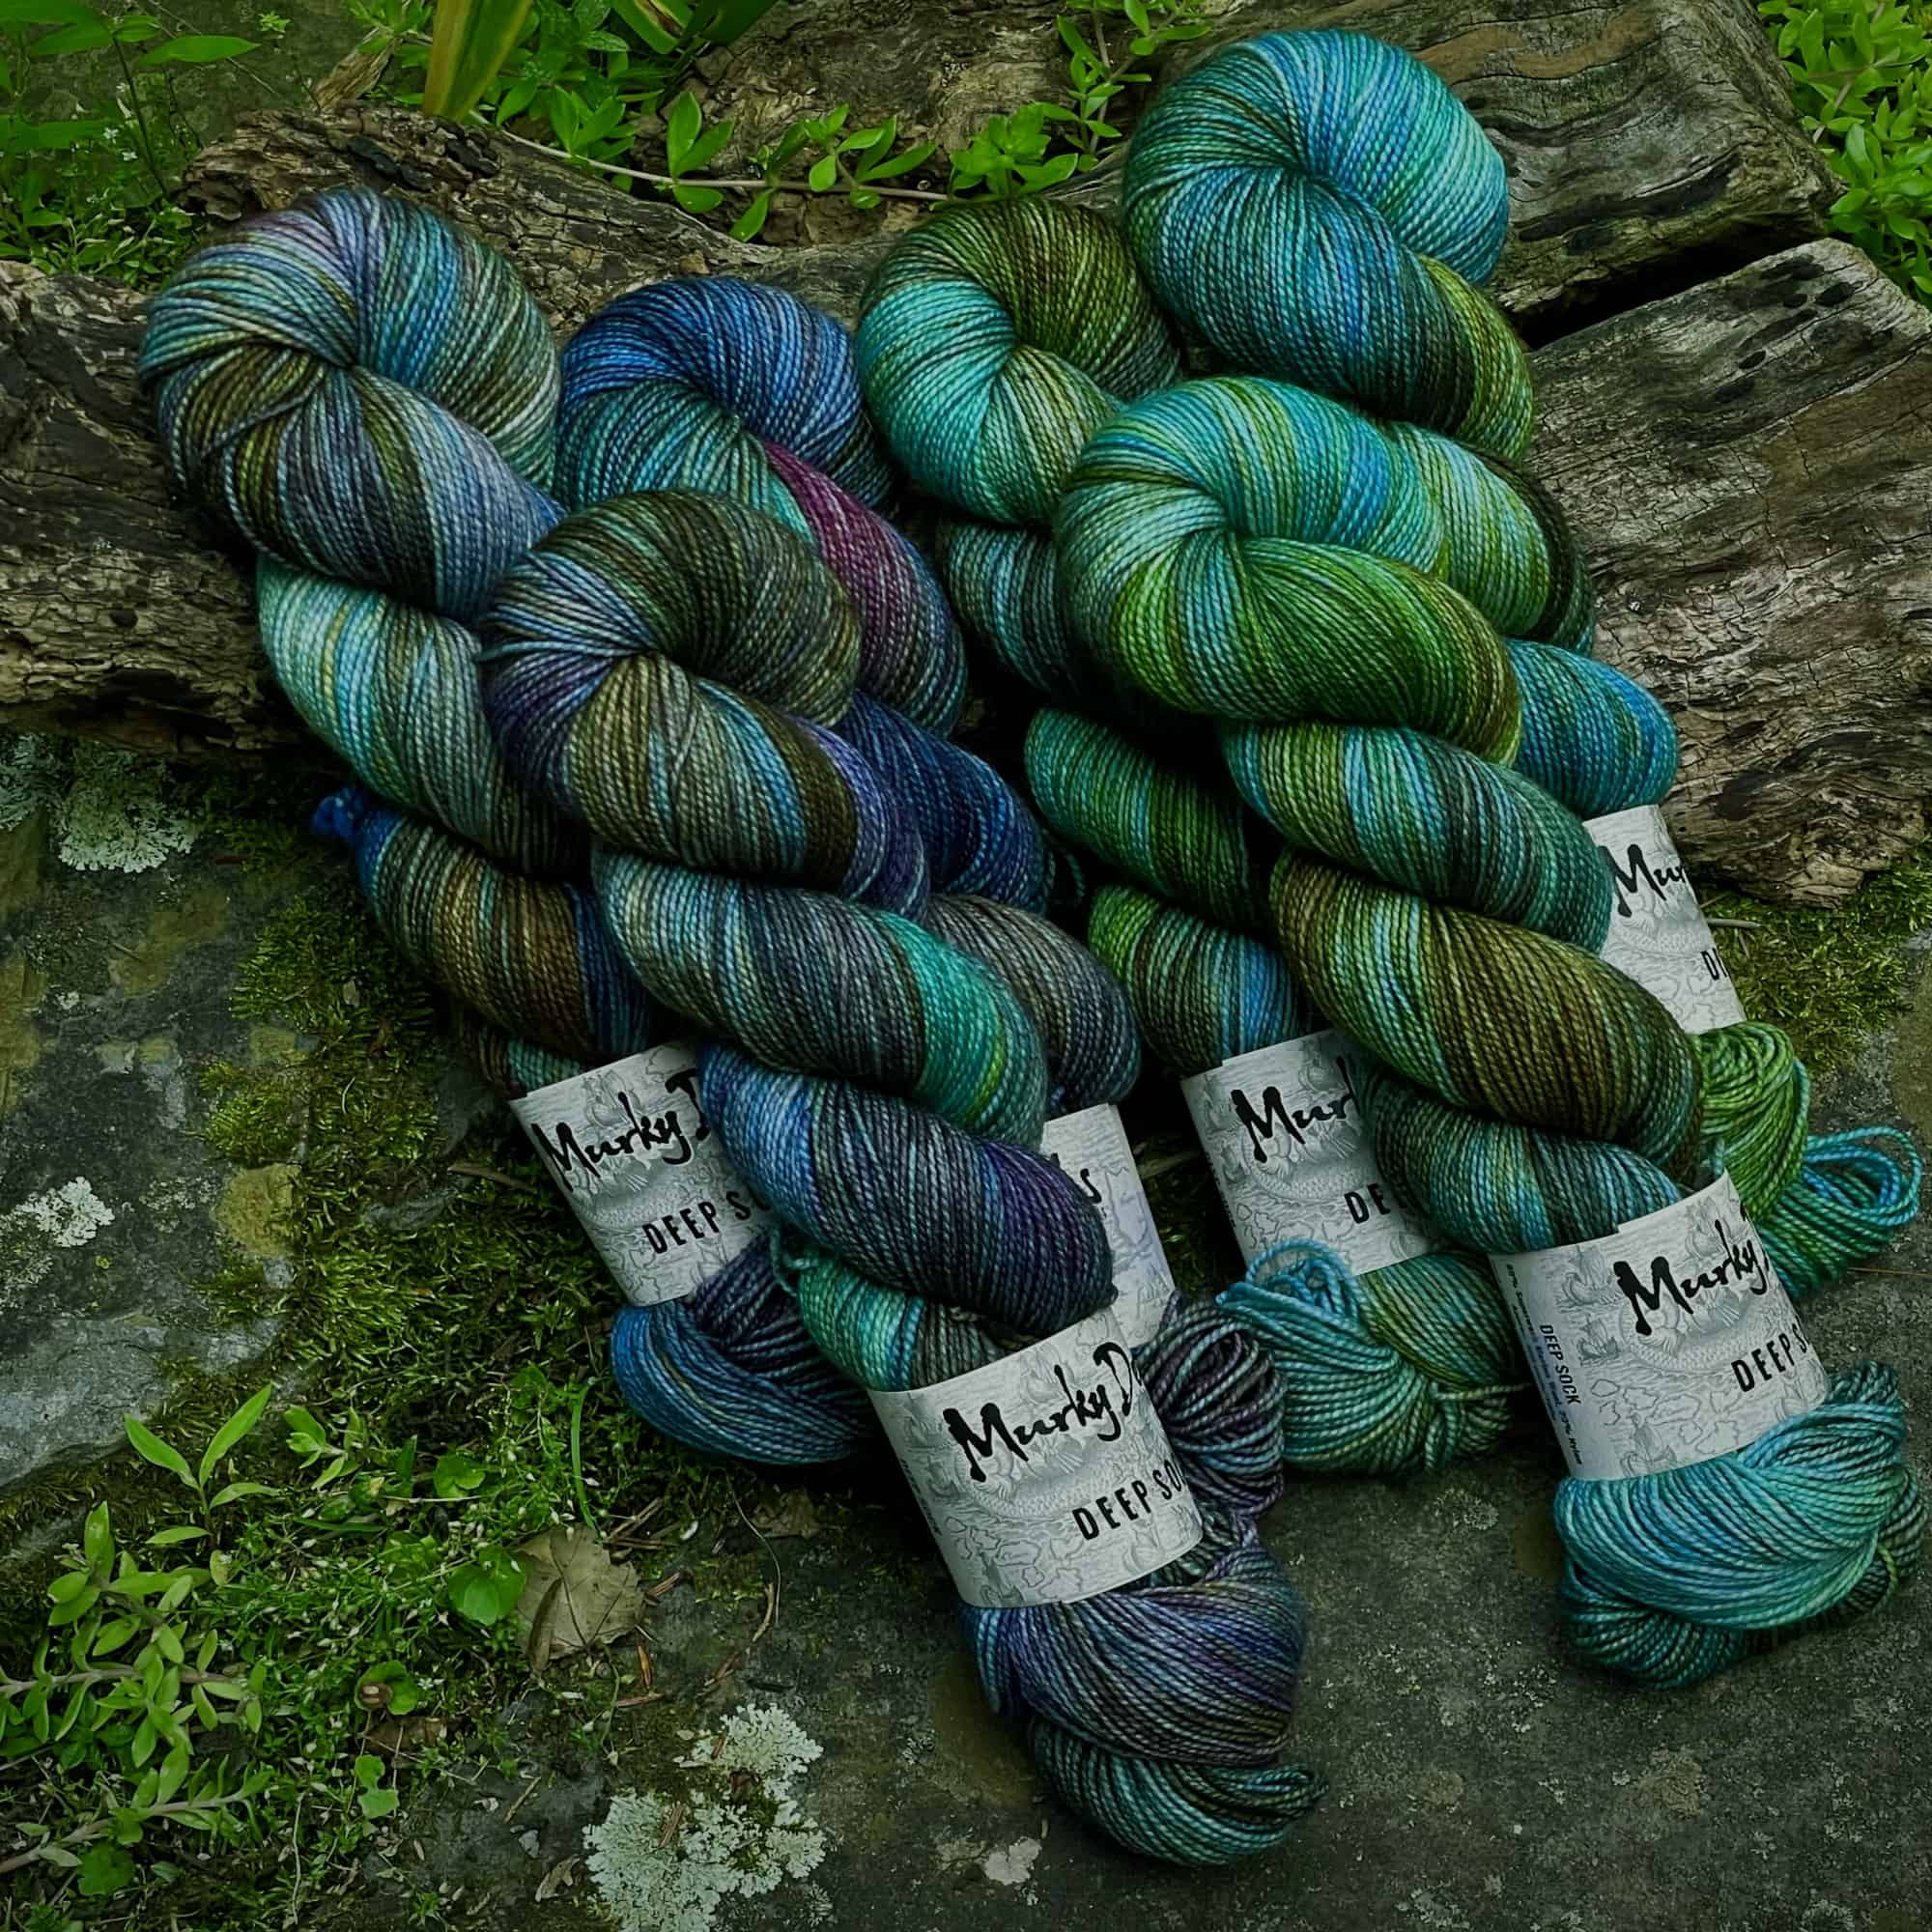 A group of two different multicolored yarns in golds, greens and blues.